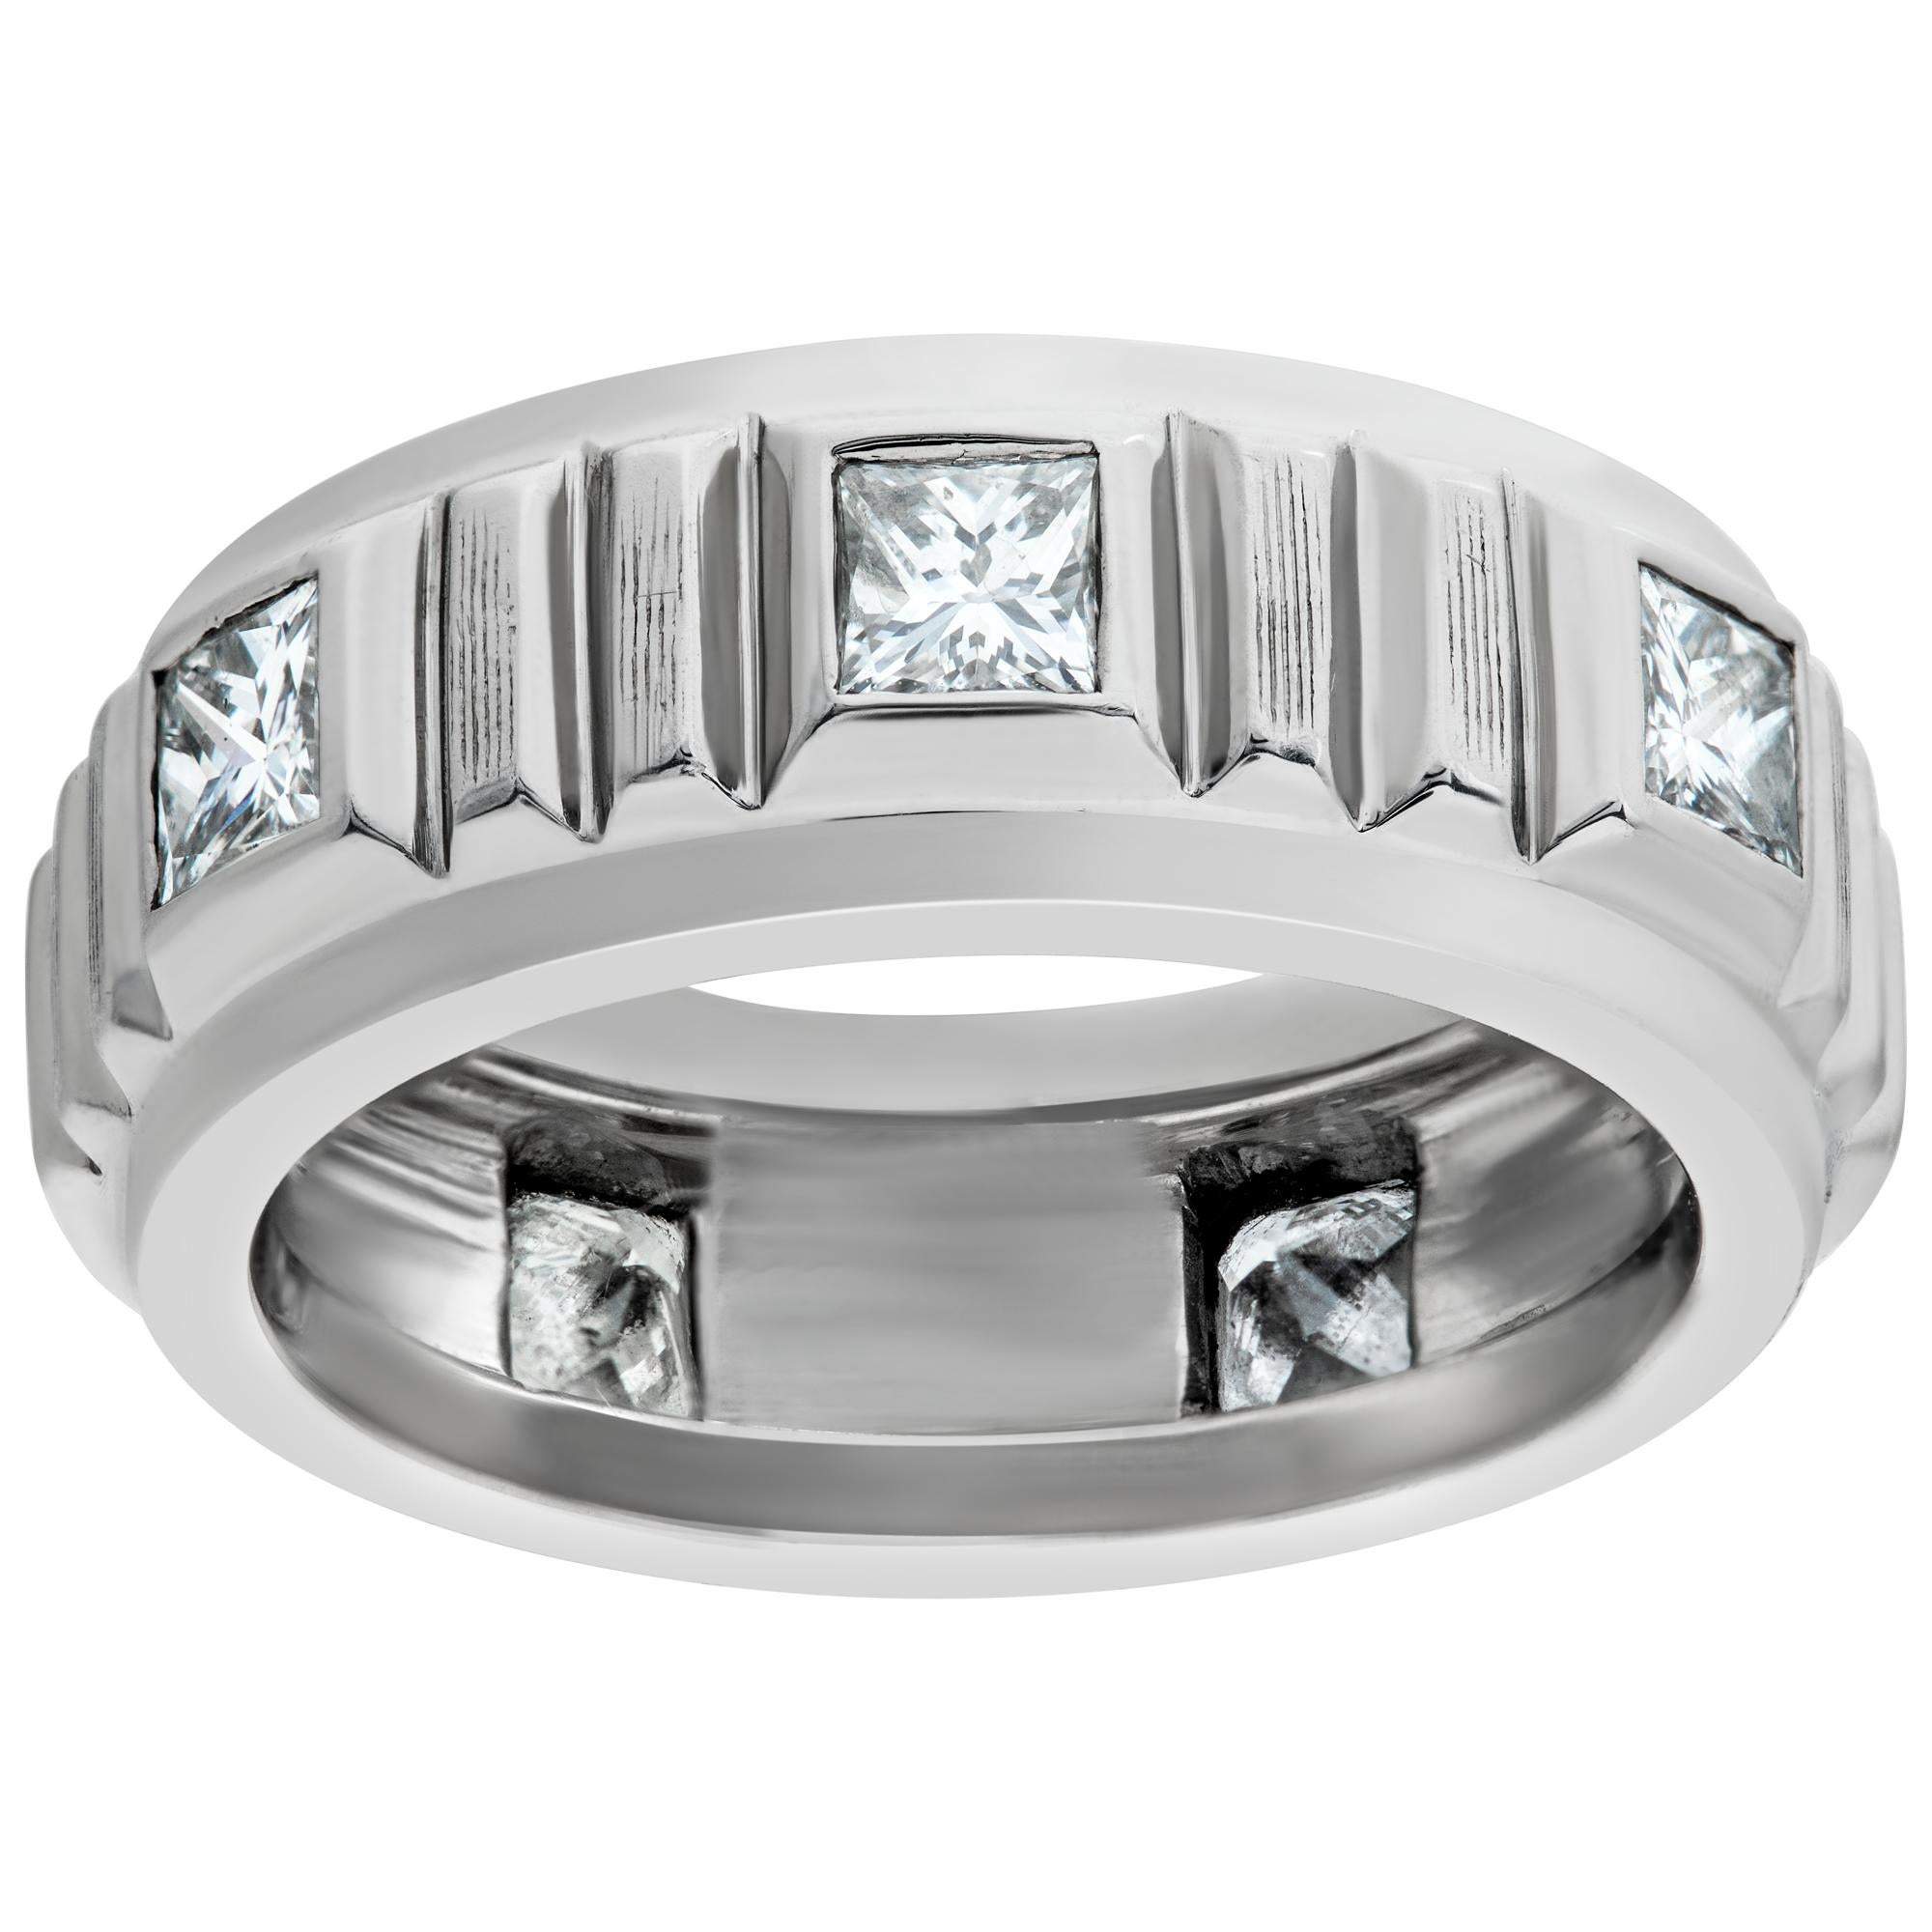 Diamond Eternity Band and Ring Lucky 7 diamonds princess cut total approximately 0.35 carat princess cut H color, VS clarity in platinum. Size 4.75. Width 0.26 inches (6.6mm).This Diamond ring is currently size 4.75 and some items can be sized up or